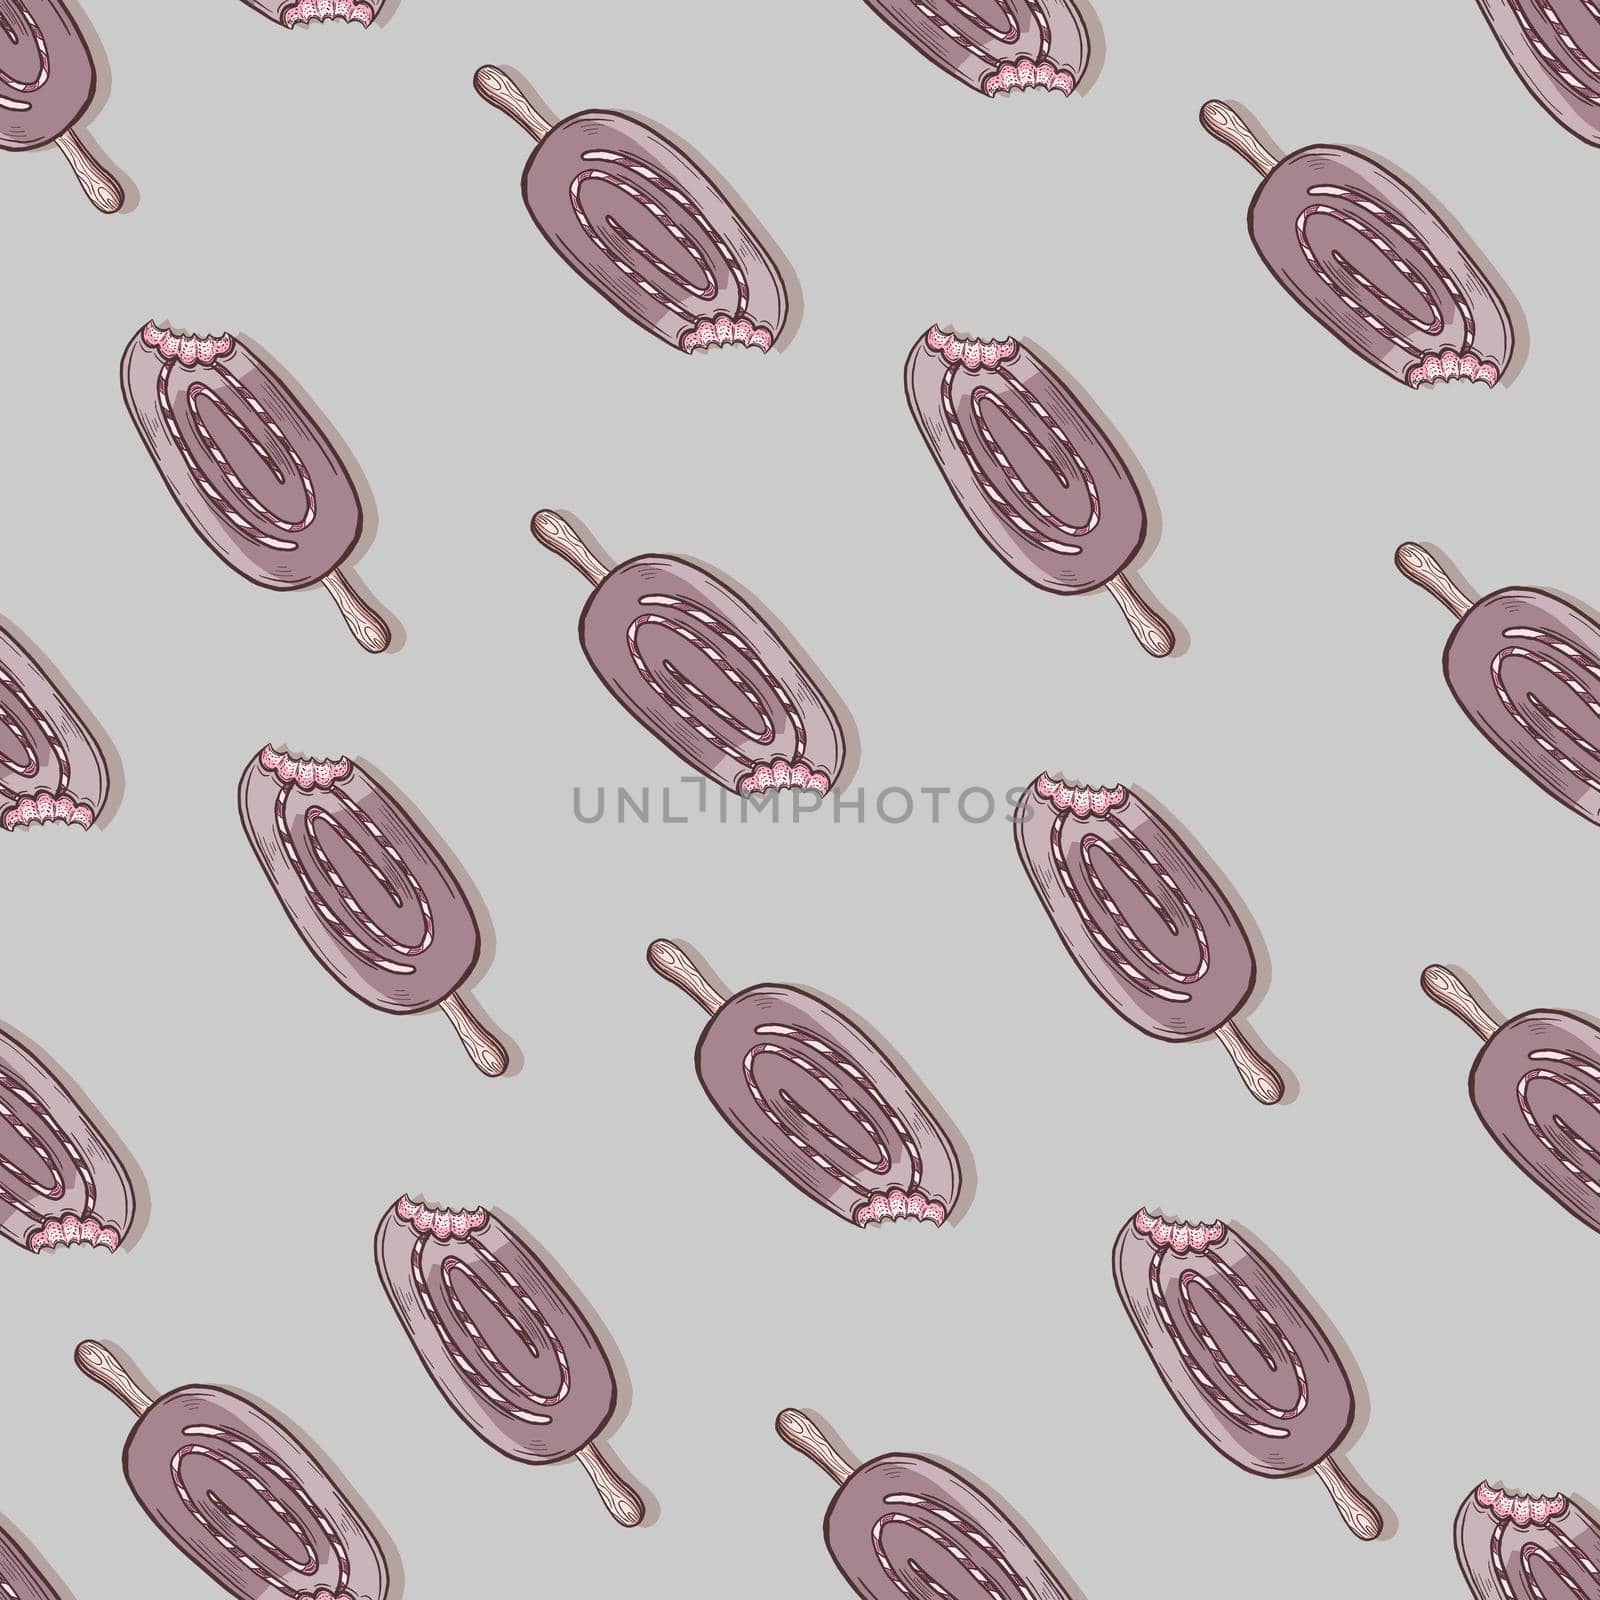 Popsicle seamless pattern illustration, Cute Popsicle on gray background.